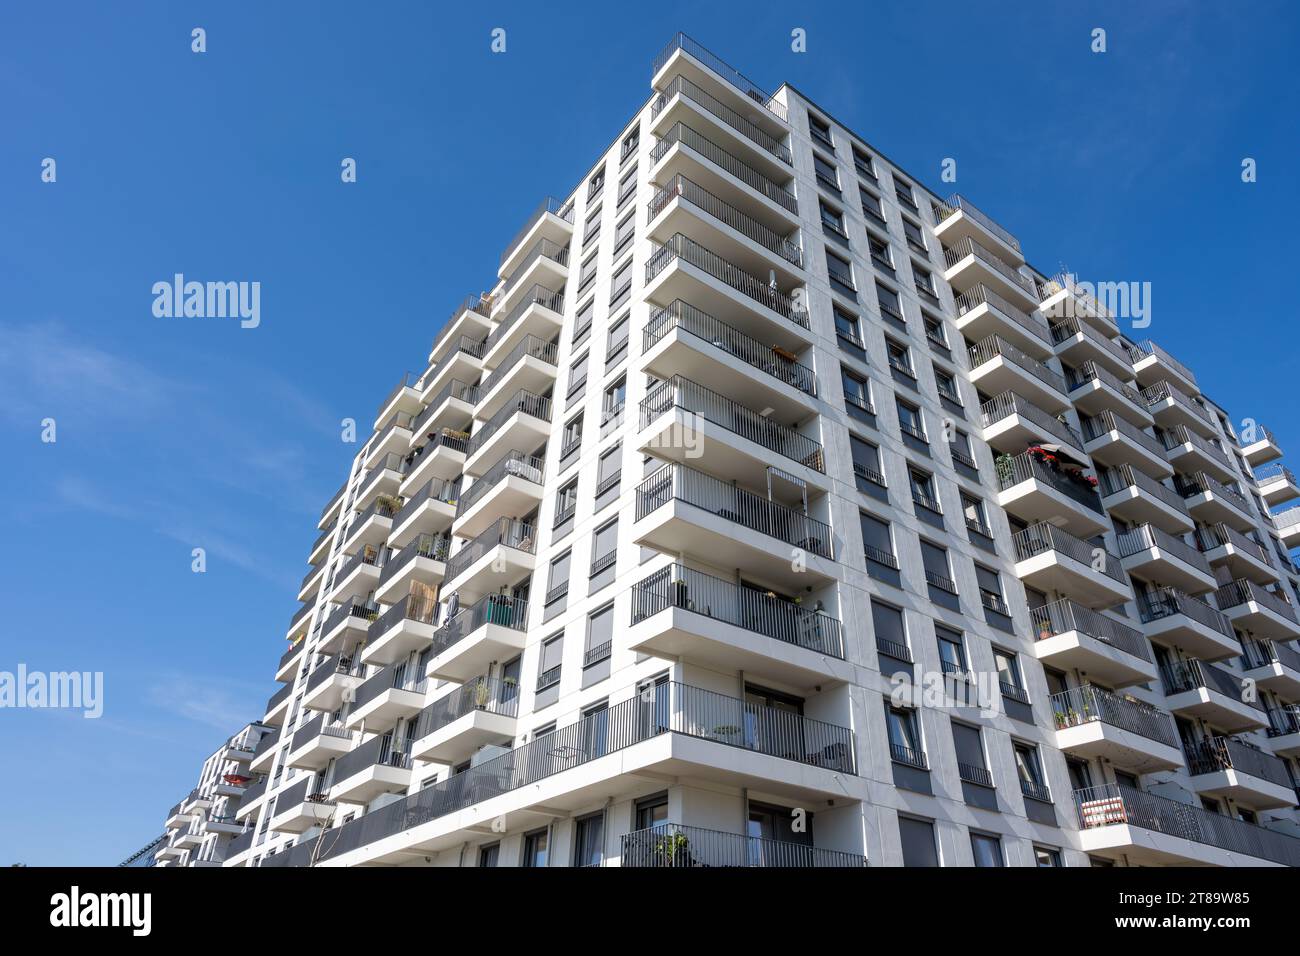 Big white apartment building with balconies seen in Berlin, Germany Stock Photo